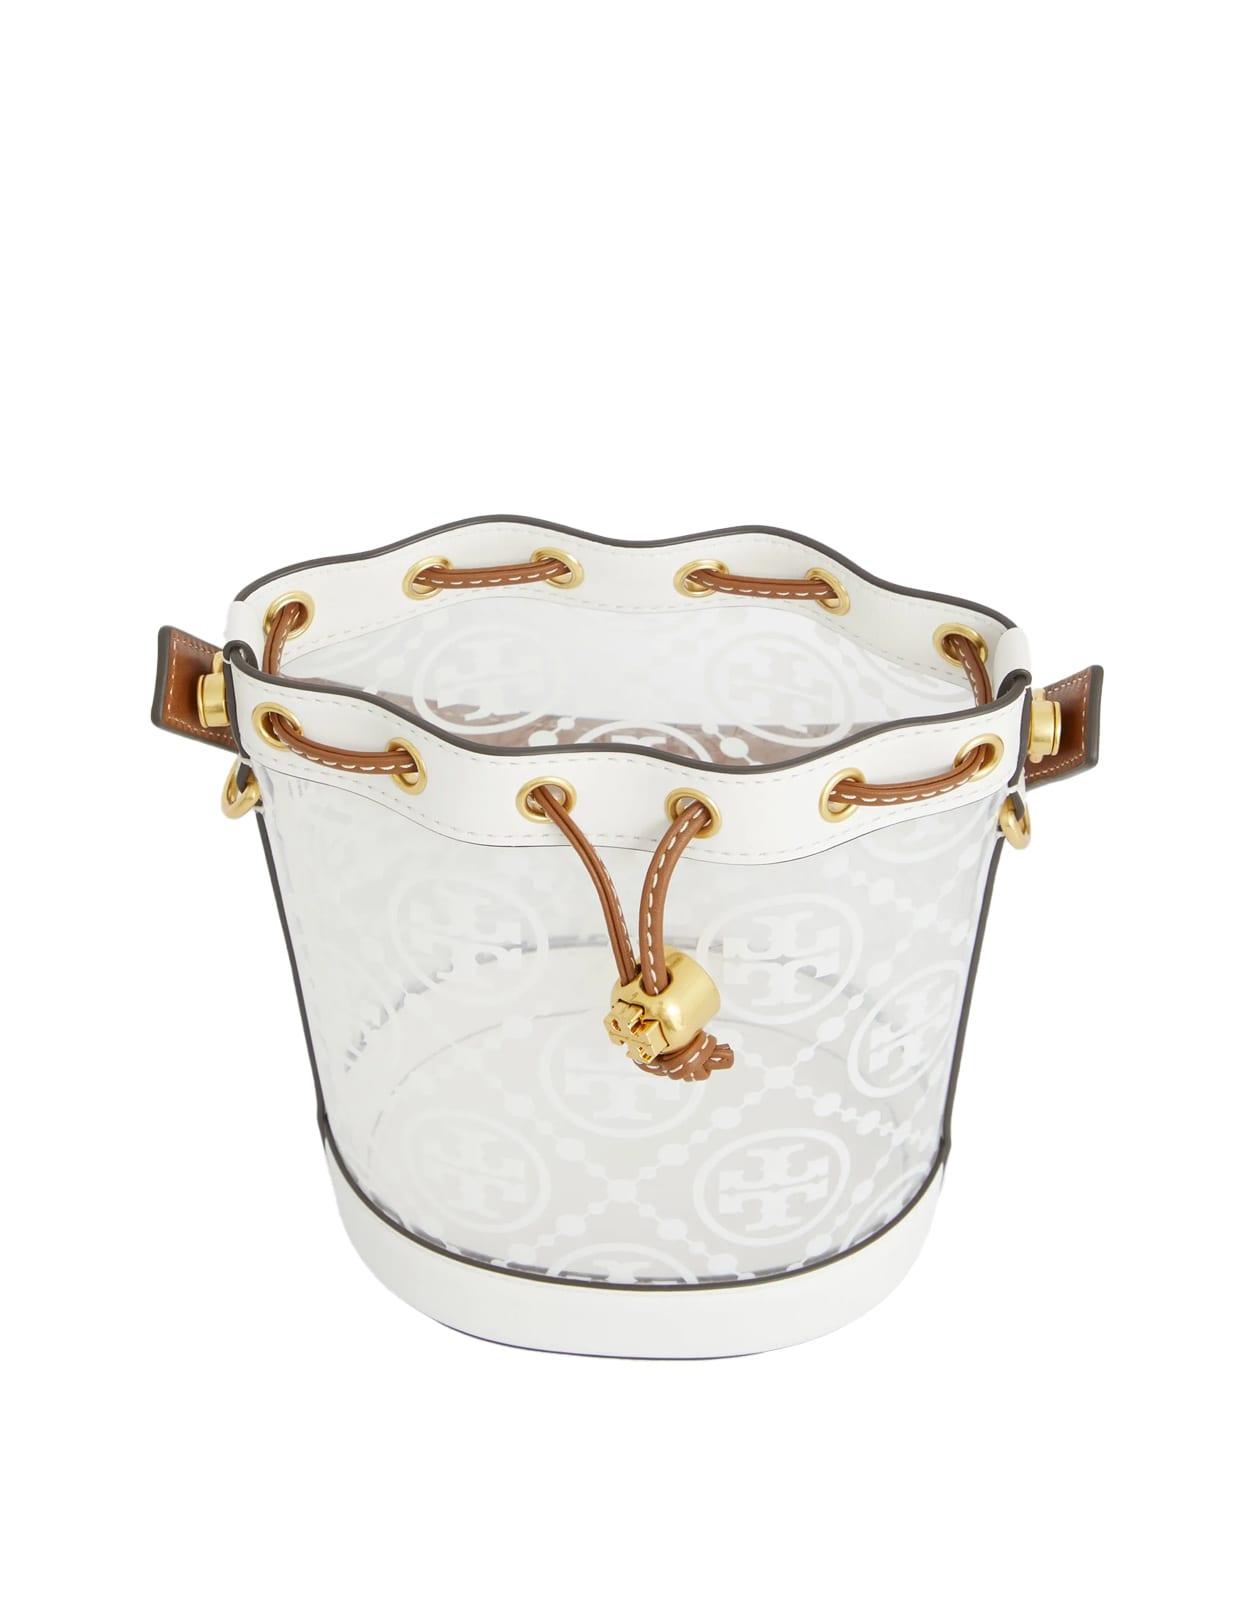 Tory Burch Transparent Pvc T Monogram Small Bucket Bag in White